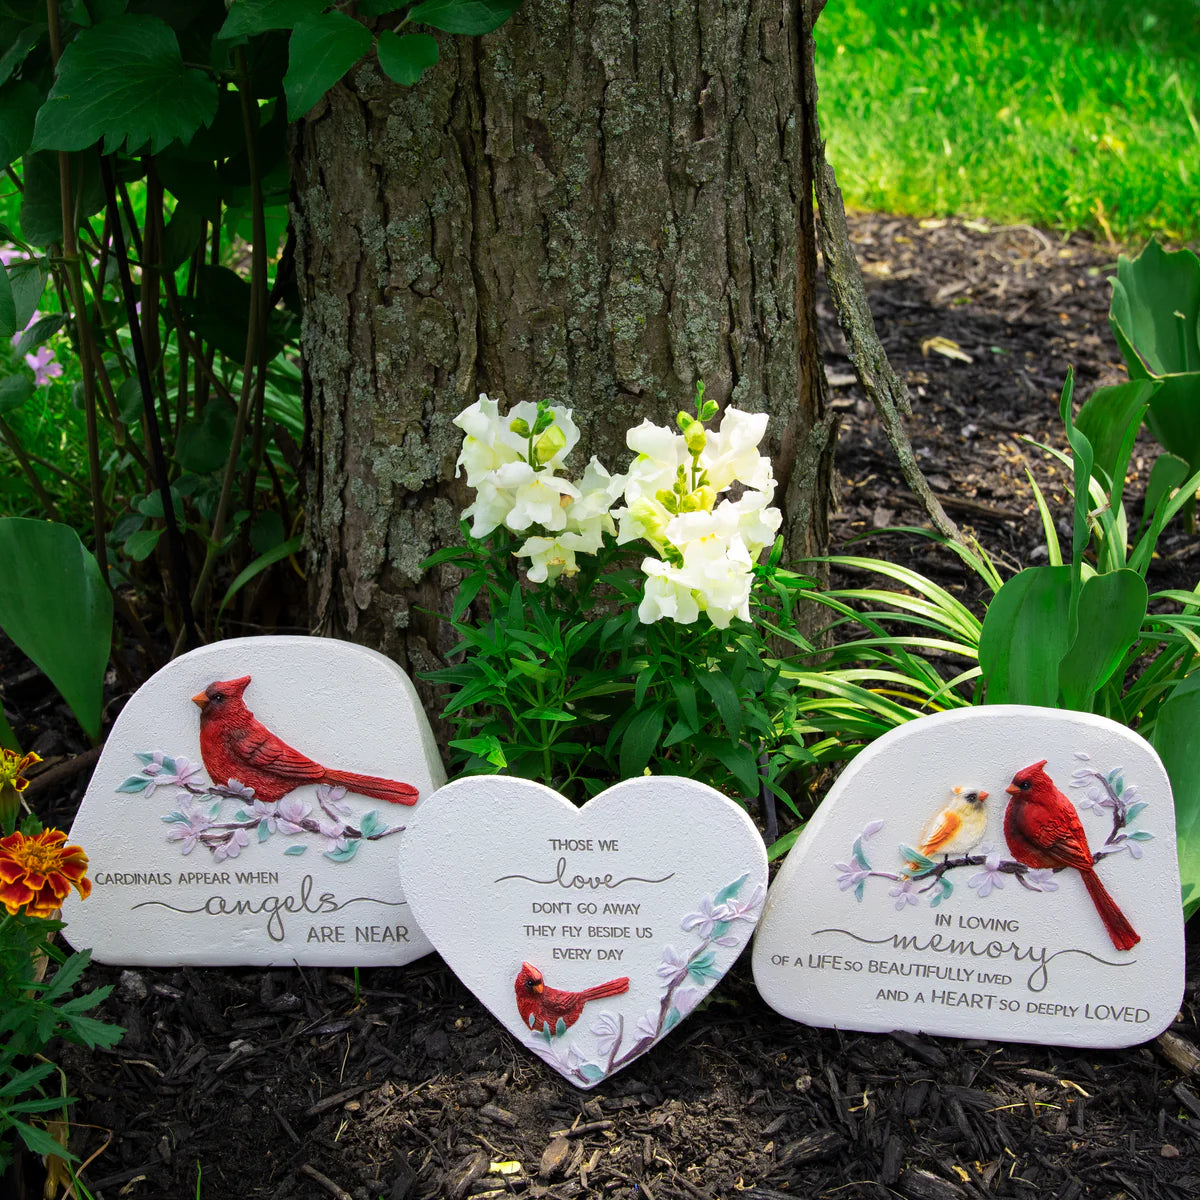 PAVILION THOSE WE LOVE 5" STANDING HEART MEMORIAL STONE